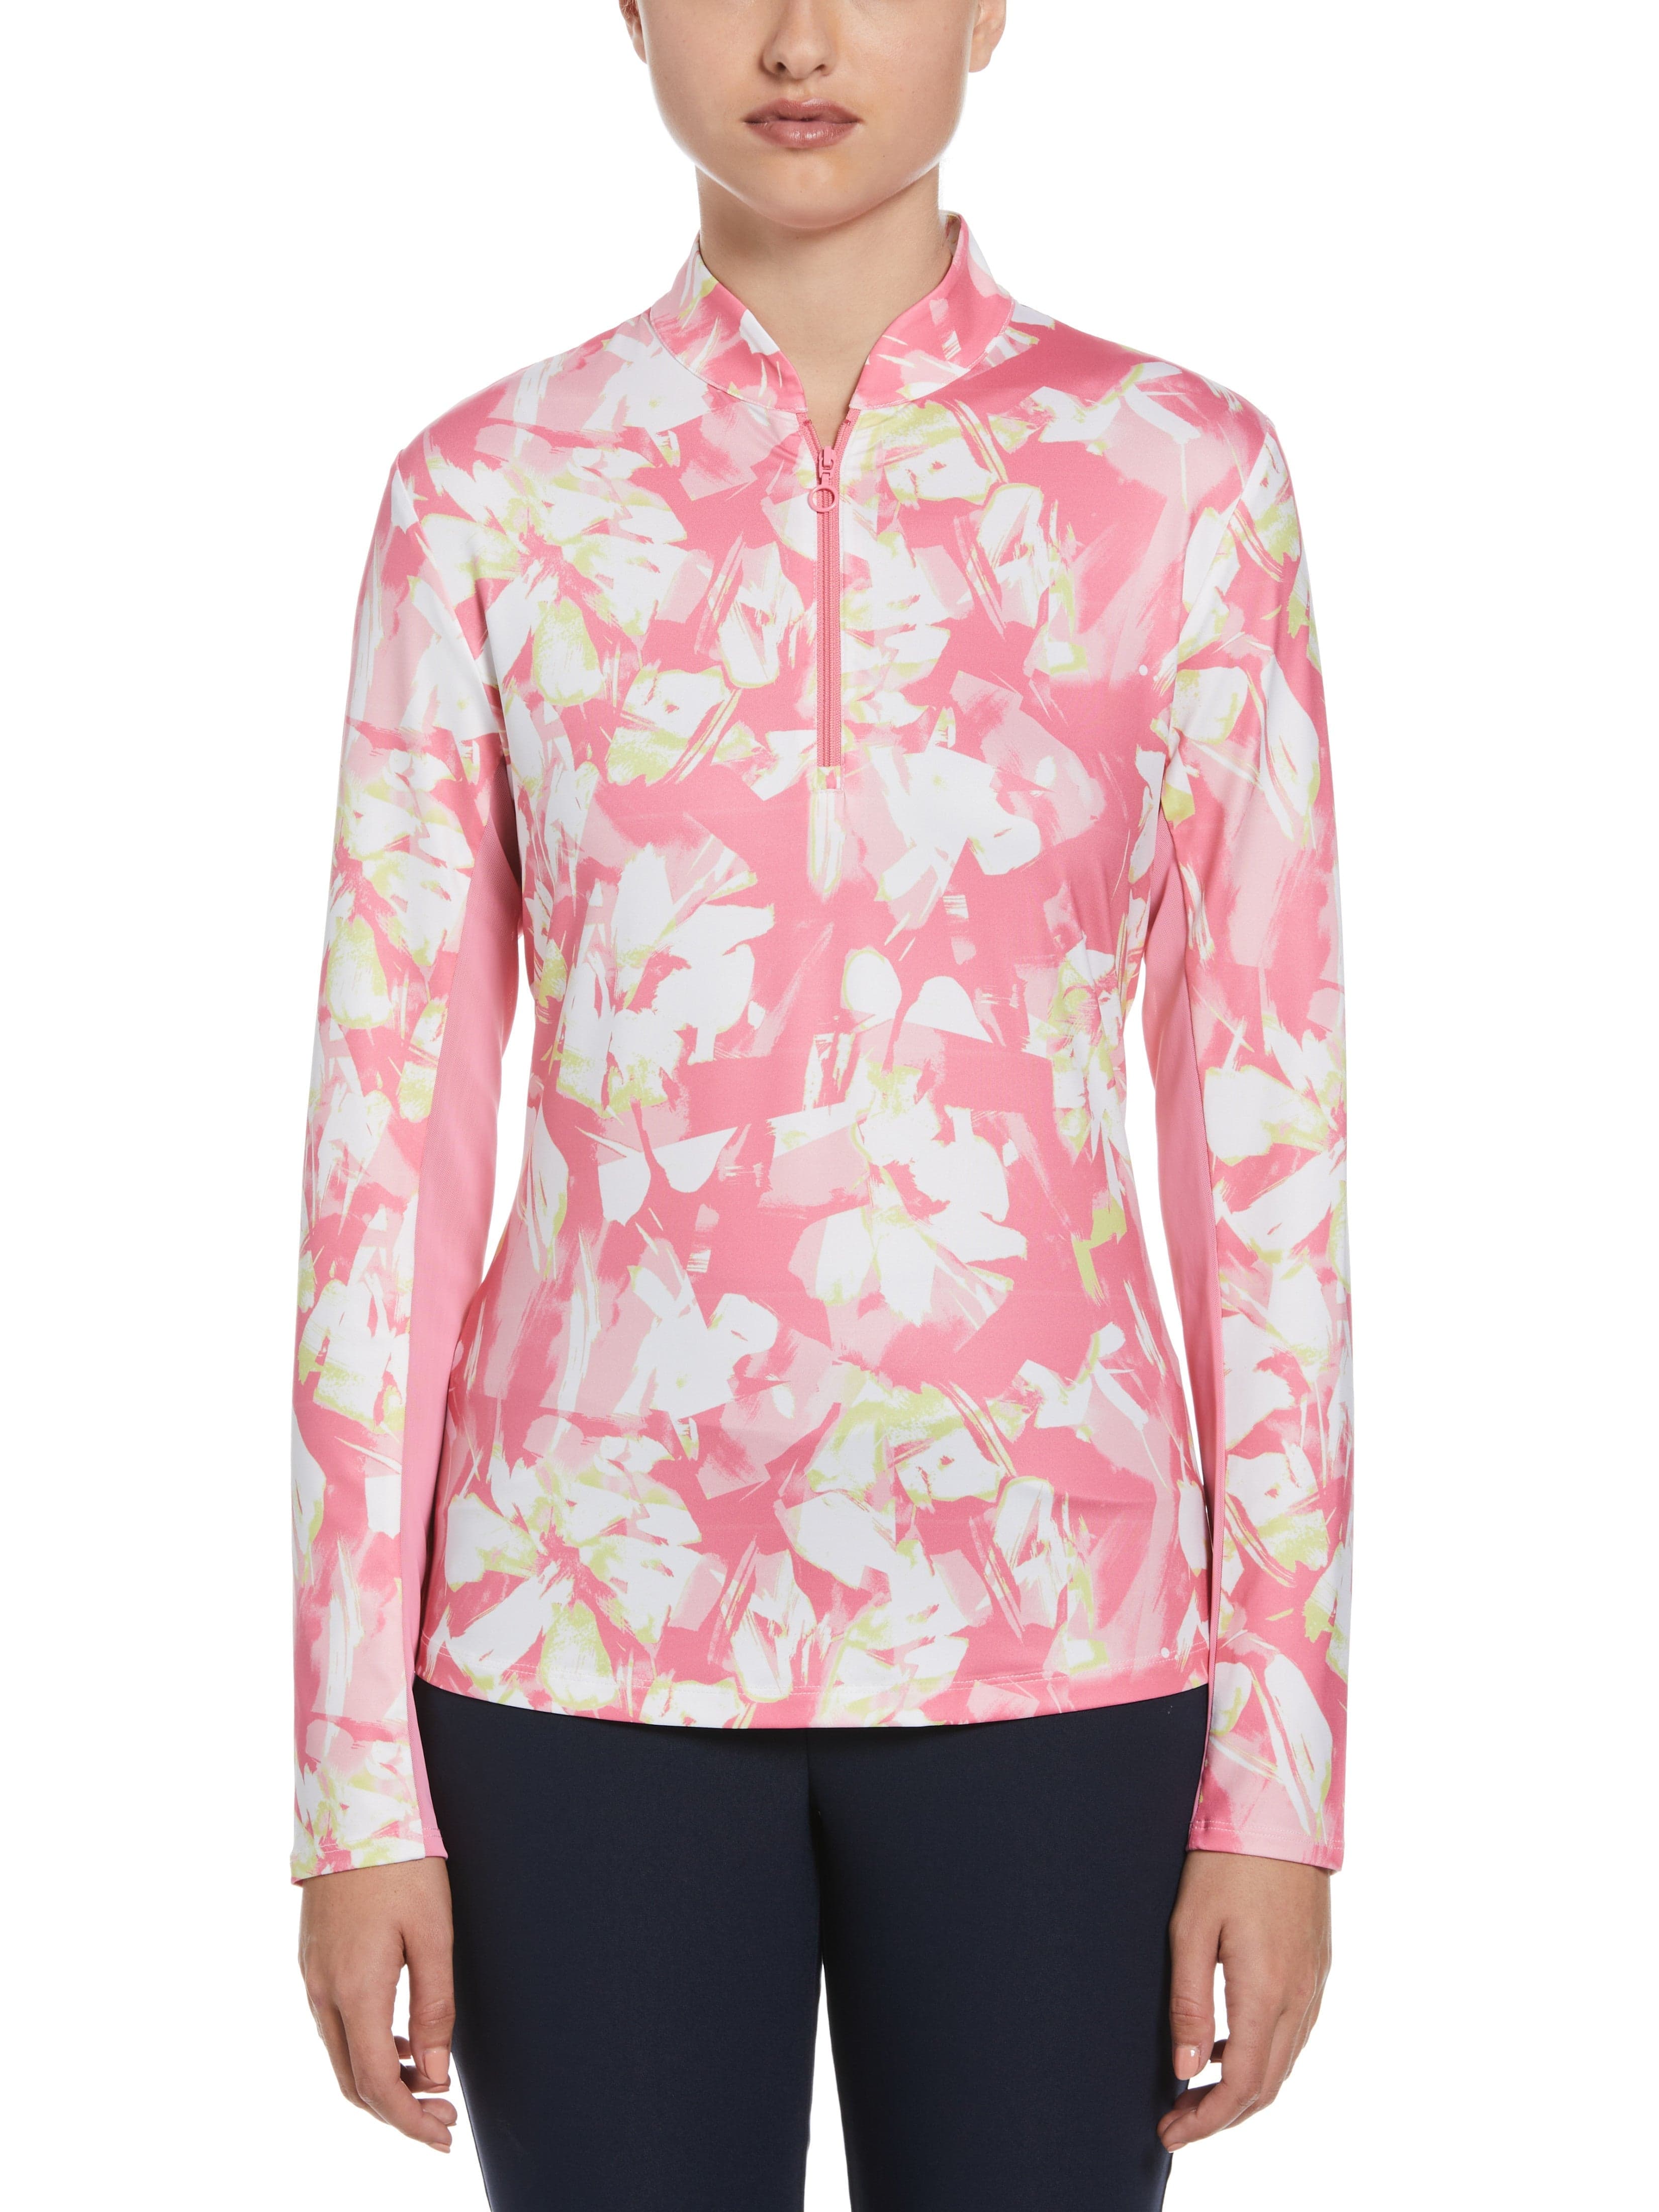 PGA TOUR Apparel Womens Floral Print Long Sleeve Golf Polo Shirt, Size 2XL, Flowering Ginger Pink, Polyester/Spandex | Golf Apparel Shop